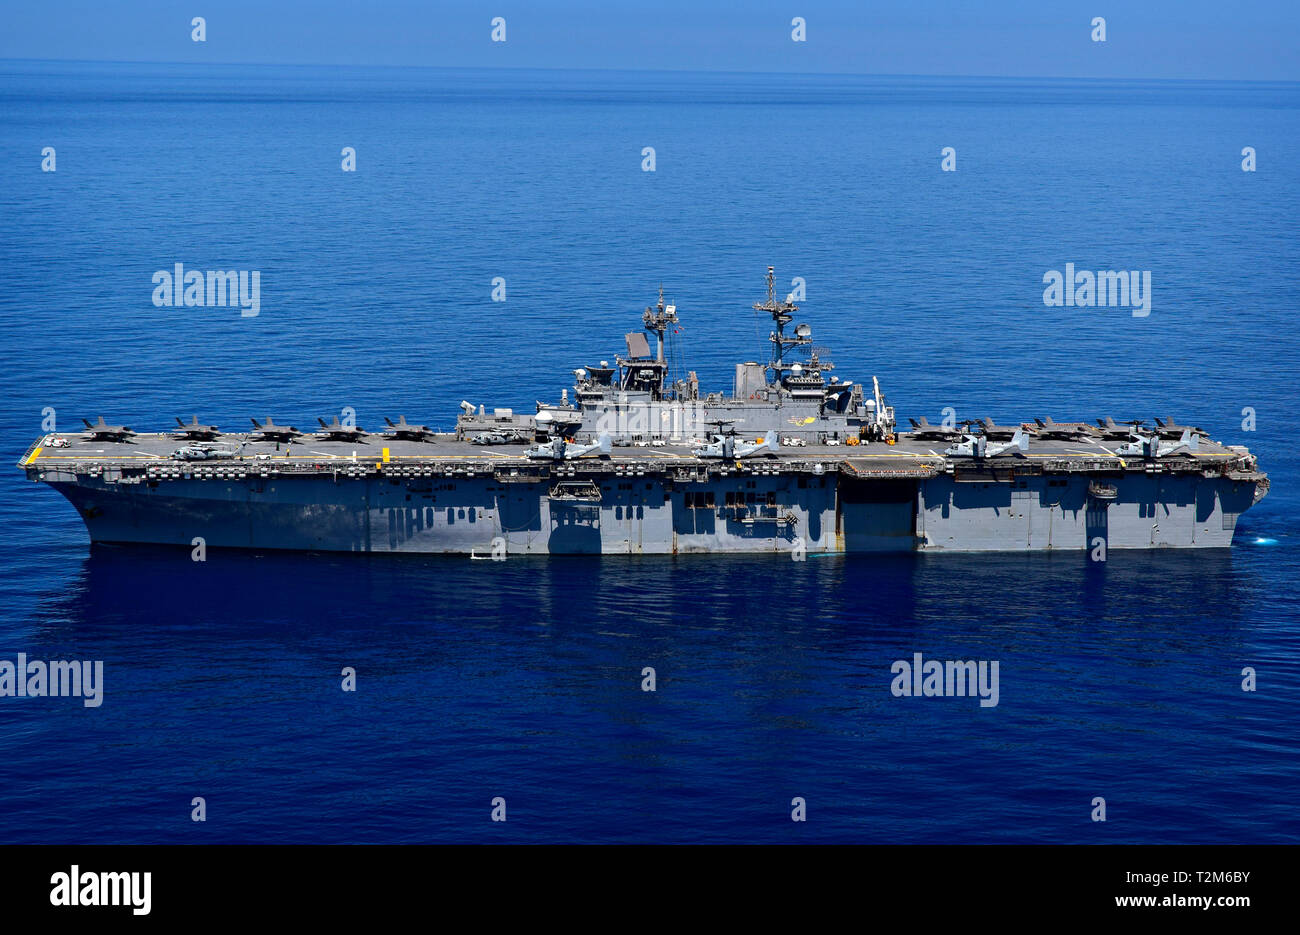 190329-N-RI884-0079 SOUTH CHINA SEA (March 29, 2019) The amphibious assault ship USS Wasp (LHD 1) transits the waters of the South China Sea. Wasp, flagship of Wasp Amphibious Ready Group, is operating in the Indo-Pacific region to enhance interoperability with partners and serve as a lethal, ready-response force for any type of contingency. (U.S. Navy photo by Mass Communication Specialist 1st Class Daniel Barker) Stock Photo